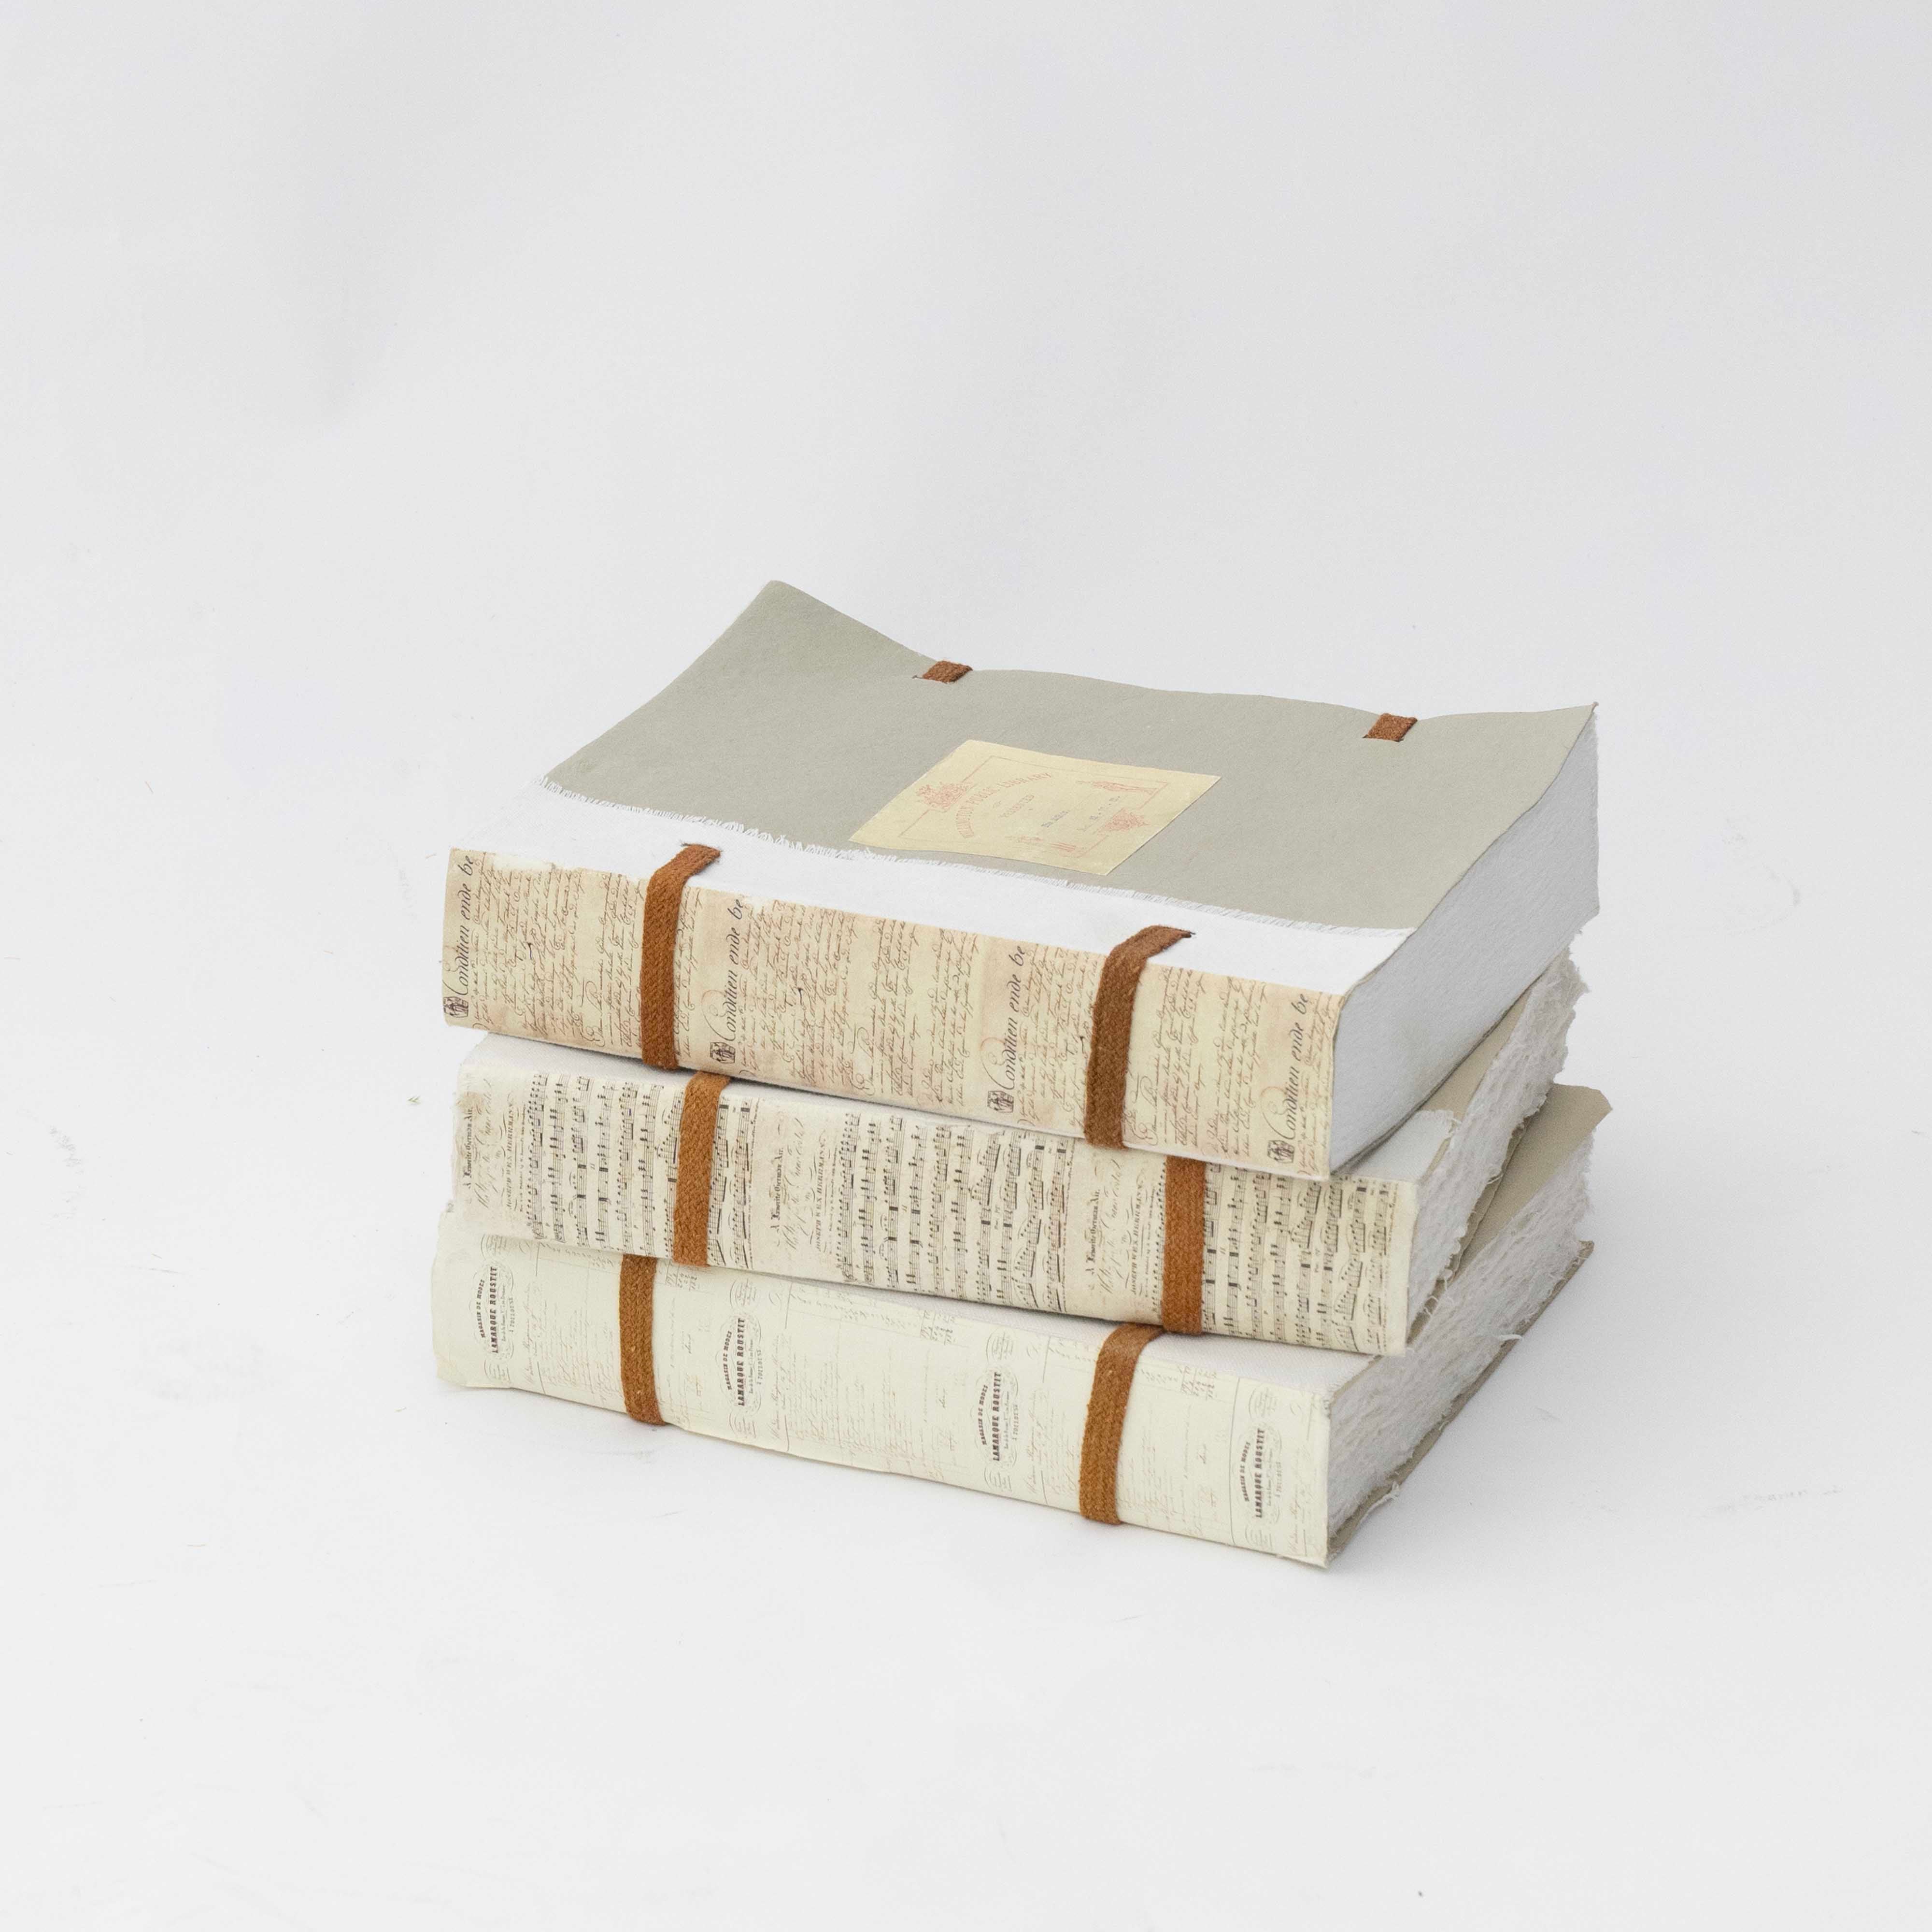 Decorative Book With Ribbon  - WS Living - UAE - Book Wood and steel Furnitures - Dubai